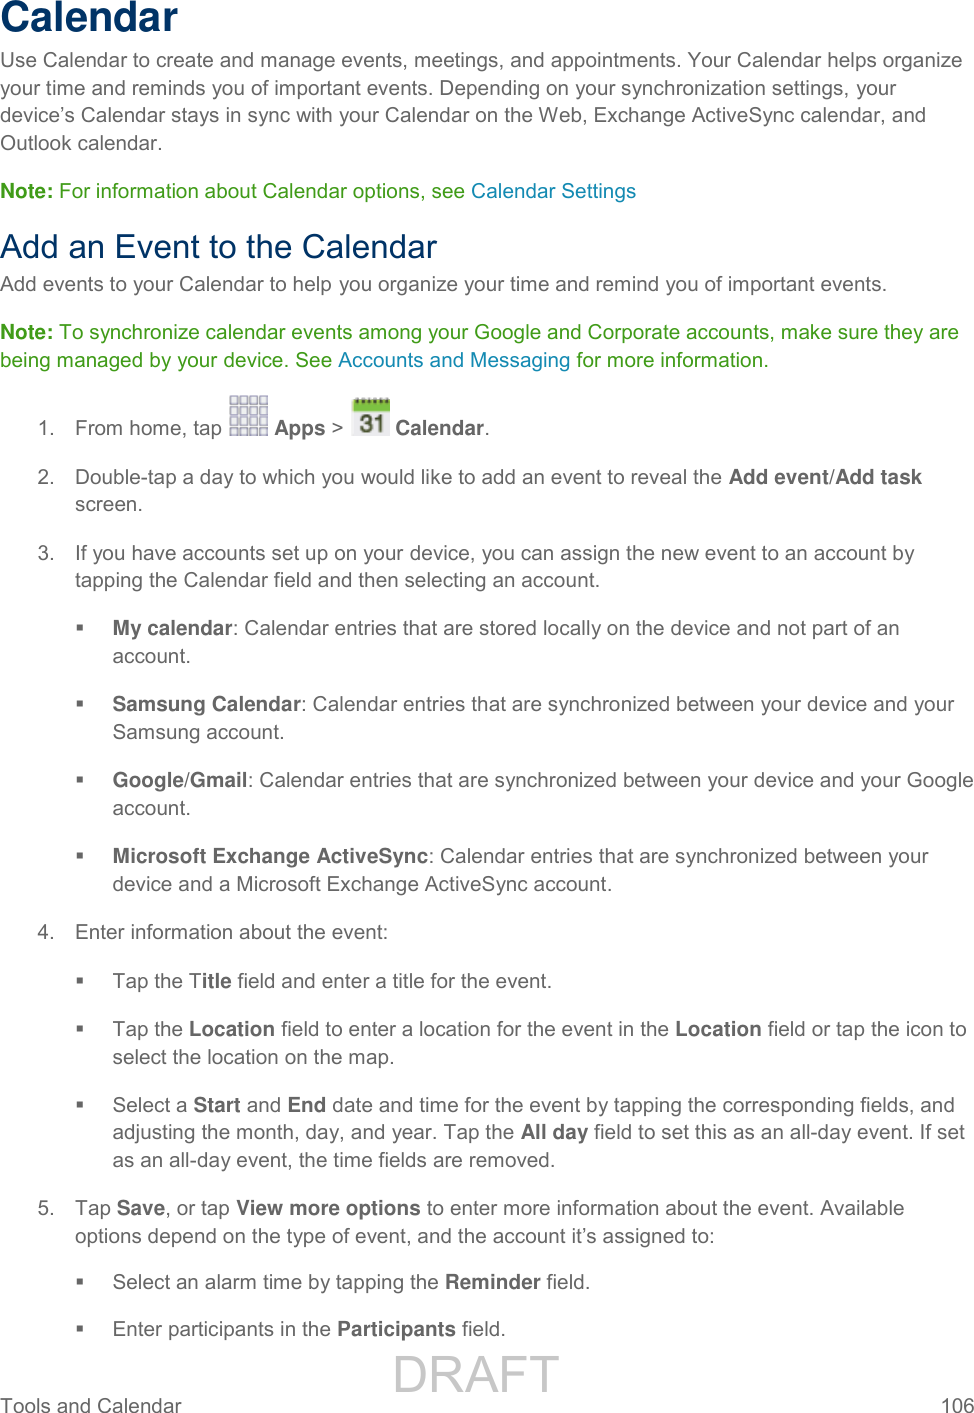                 DRAFT FOR INTERNAL USE ONLY Tools and Calendar  106   Calendar Use Calendar to create and manage events, meetings, and appointments. Your Calendar helps organize your time and reminds you of important events. Depending on your synchronization settings, your device’s Calendar stays in sync with your Calendar on the Web, Exchange ActiveSync calendar, and Outlook calendar. Note: For information about Calendar options, see Calendar Settings Add an Event to the Calendar Add events to your Calendar to help you organize your time and remind you of important events. Note: To synchronize calendar events among your Google and Corporate accounts, make sure they are being managed by your device. See Accounts and Messaging for more information. 1.  From home, tap   Apps &gt;   Calendar.  2.  Double-tap a day to which you would like to add an event to reveal the Add event/Add task screen. 3.  If you have accounts set up on your device, you can assign the new event to an account by tapping the Calendar field and then selecting an account.  My calendar: Calendar entries that are stored locally on the device and not part of an account.  Samsung Calendar: Calendar entries that are synchronized between your device and your Samsung account.  Google/Gmail: Calendar entries that are synchronized between your device and your Google account.  Microsoft Exchange ActiveSync: Calendar entries that are synchronized between your device and a Microsoft Exchange ActiveSync account. 4.  Enter information about the event:   Tap the Title field and enter a title for the event.    Tap the Location field to enter a location for the event in the Location field or tap the icon to select the location on the map.   Select a Start and End date and time for the event by tapping the corresponding fields, and adjusting the month, day, and year. Tap the All day field to set this as an all-day event. If set as an all-day event, the time fields are removed. 5.  Tap Save, or tap View more options to enter more information about the event. Available options depend on the type of event, and the account it’s assigned to:   Select an alarm time by tapping the Reminder field.   Enter participants in the Participants field. 